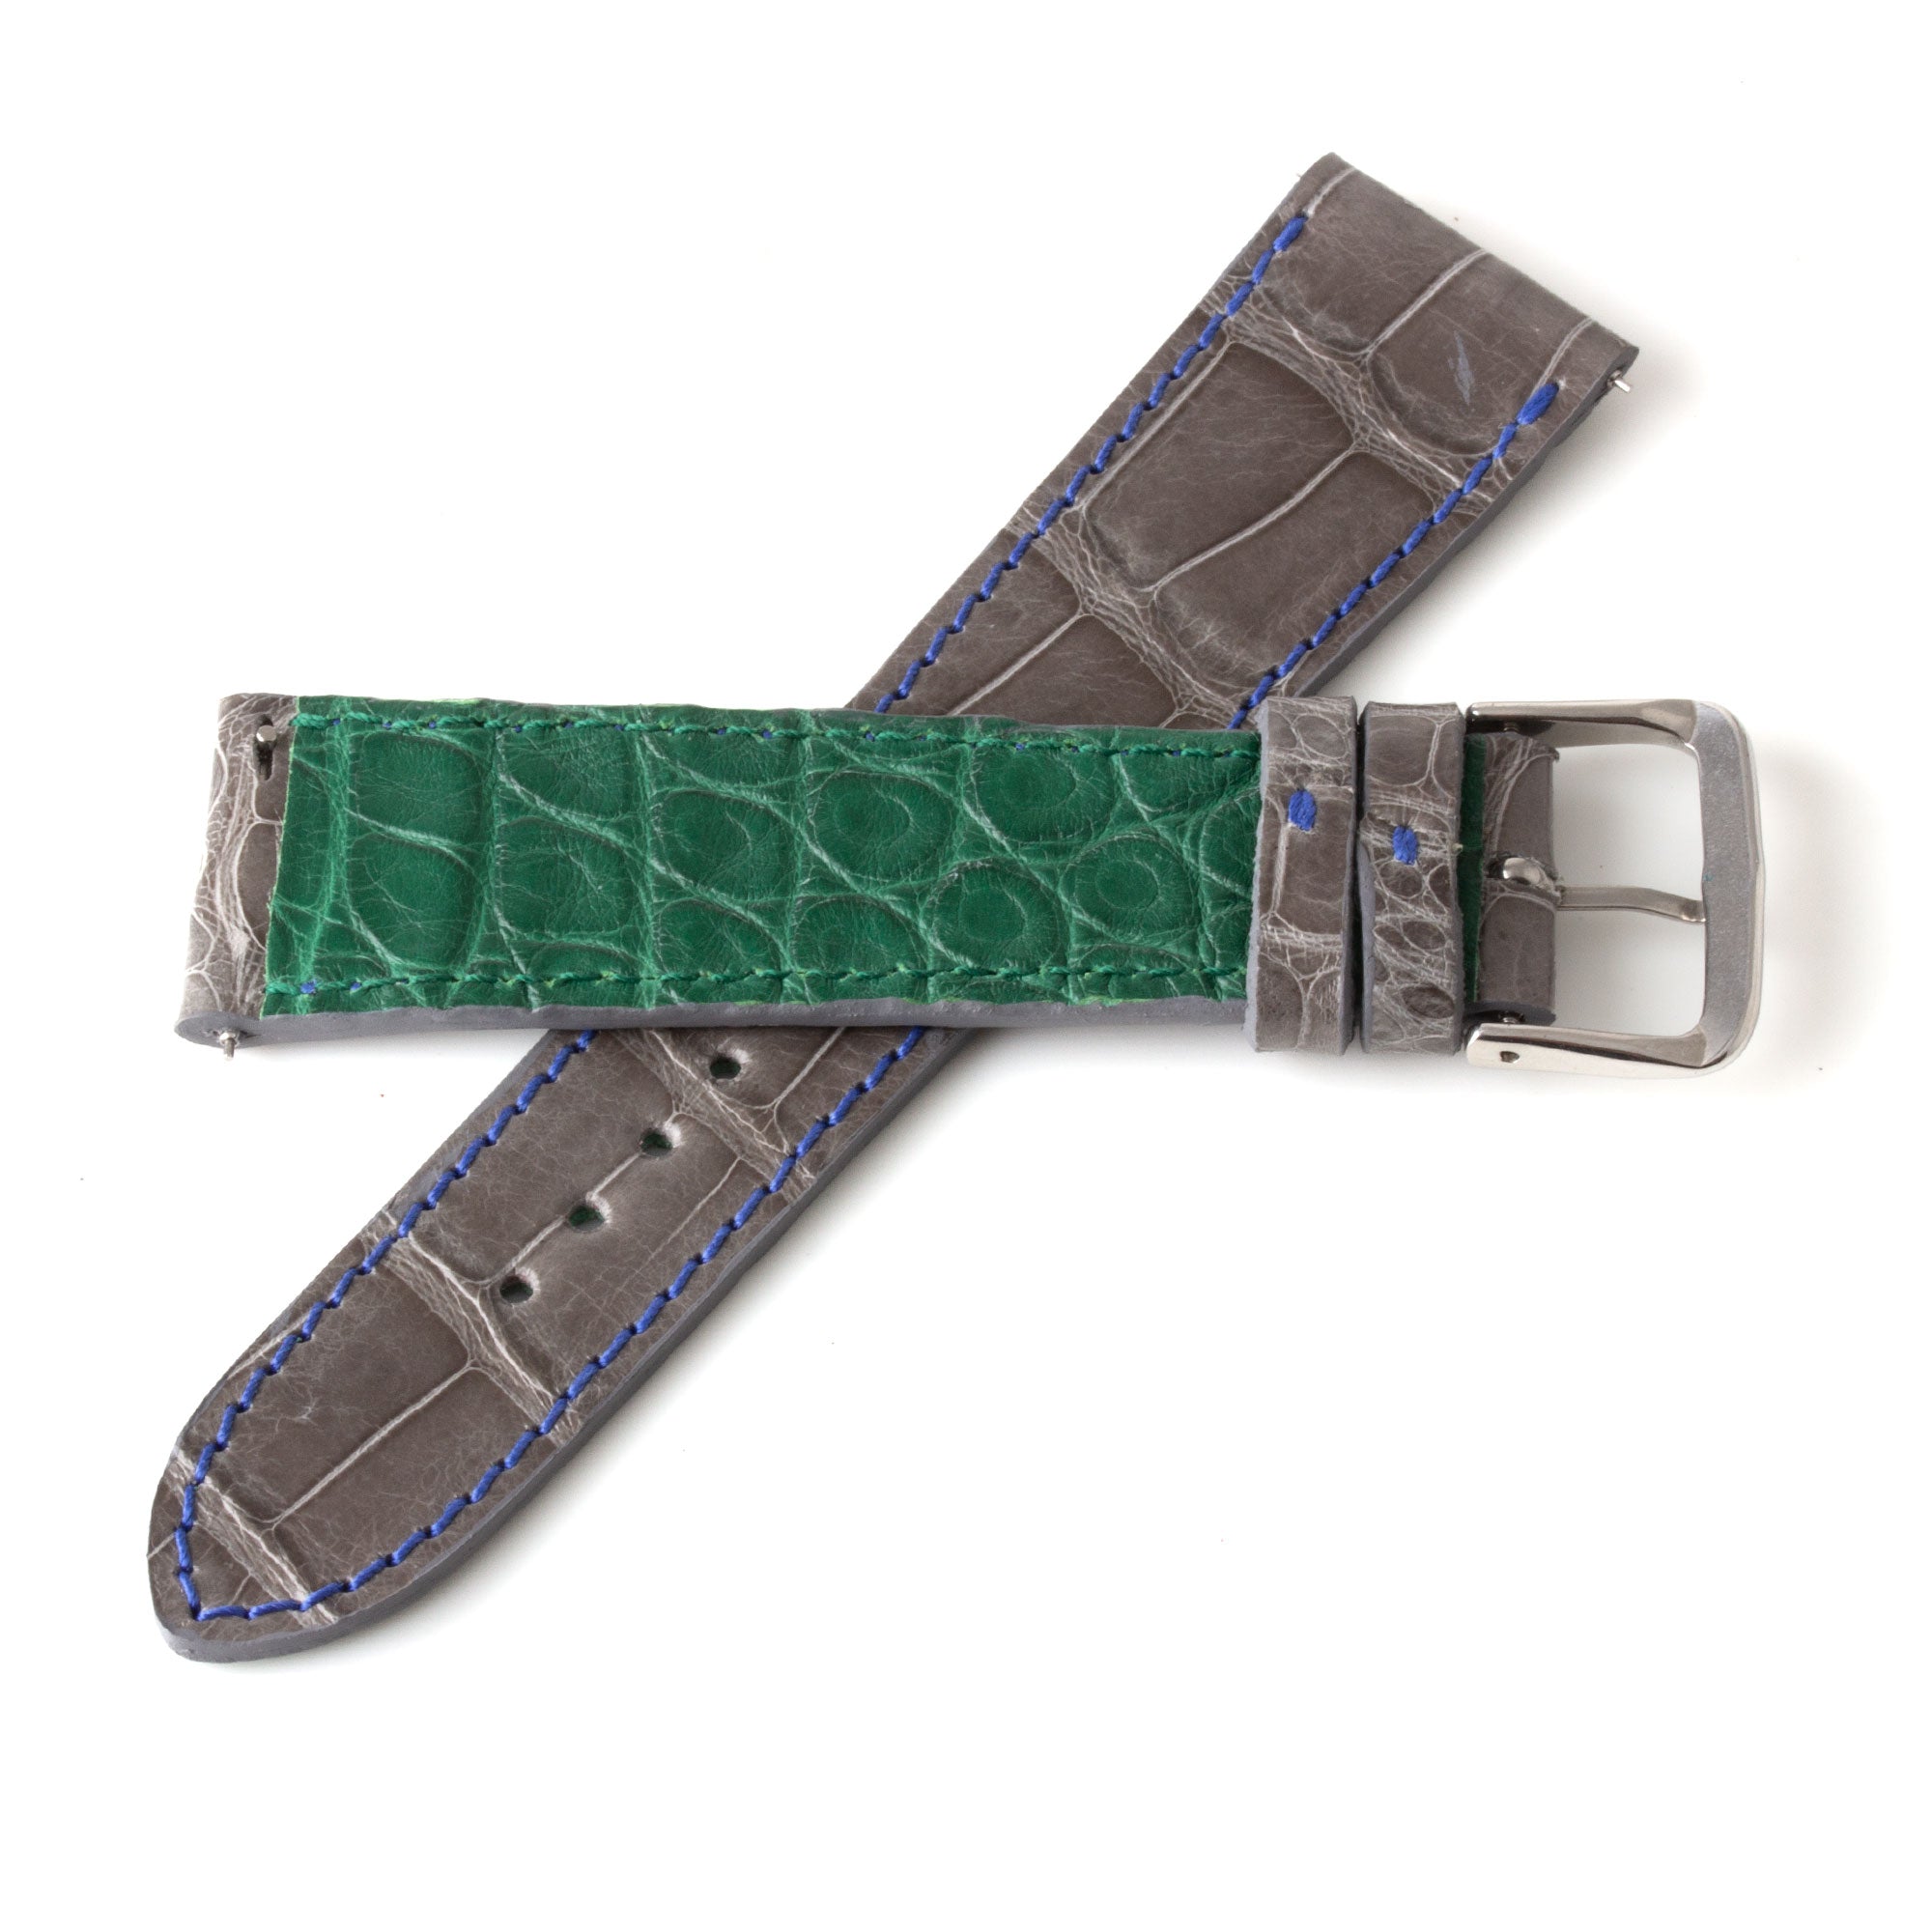 Alligator "Solo" leather watch band - 22mm width (0.87 inches) / Size M (n° 4)